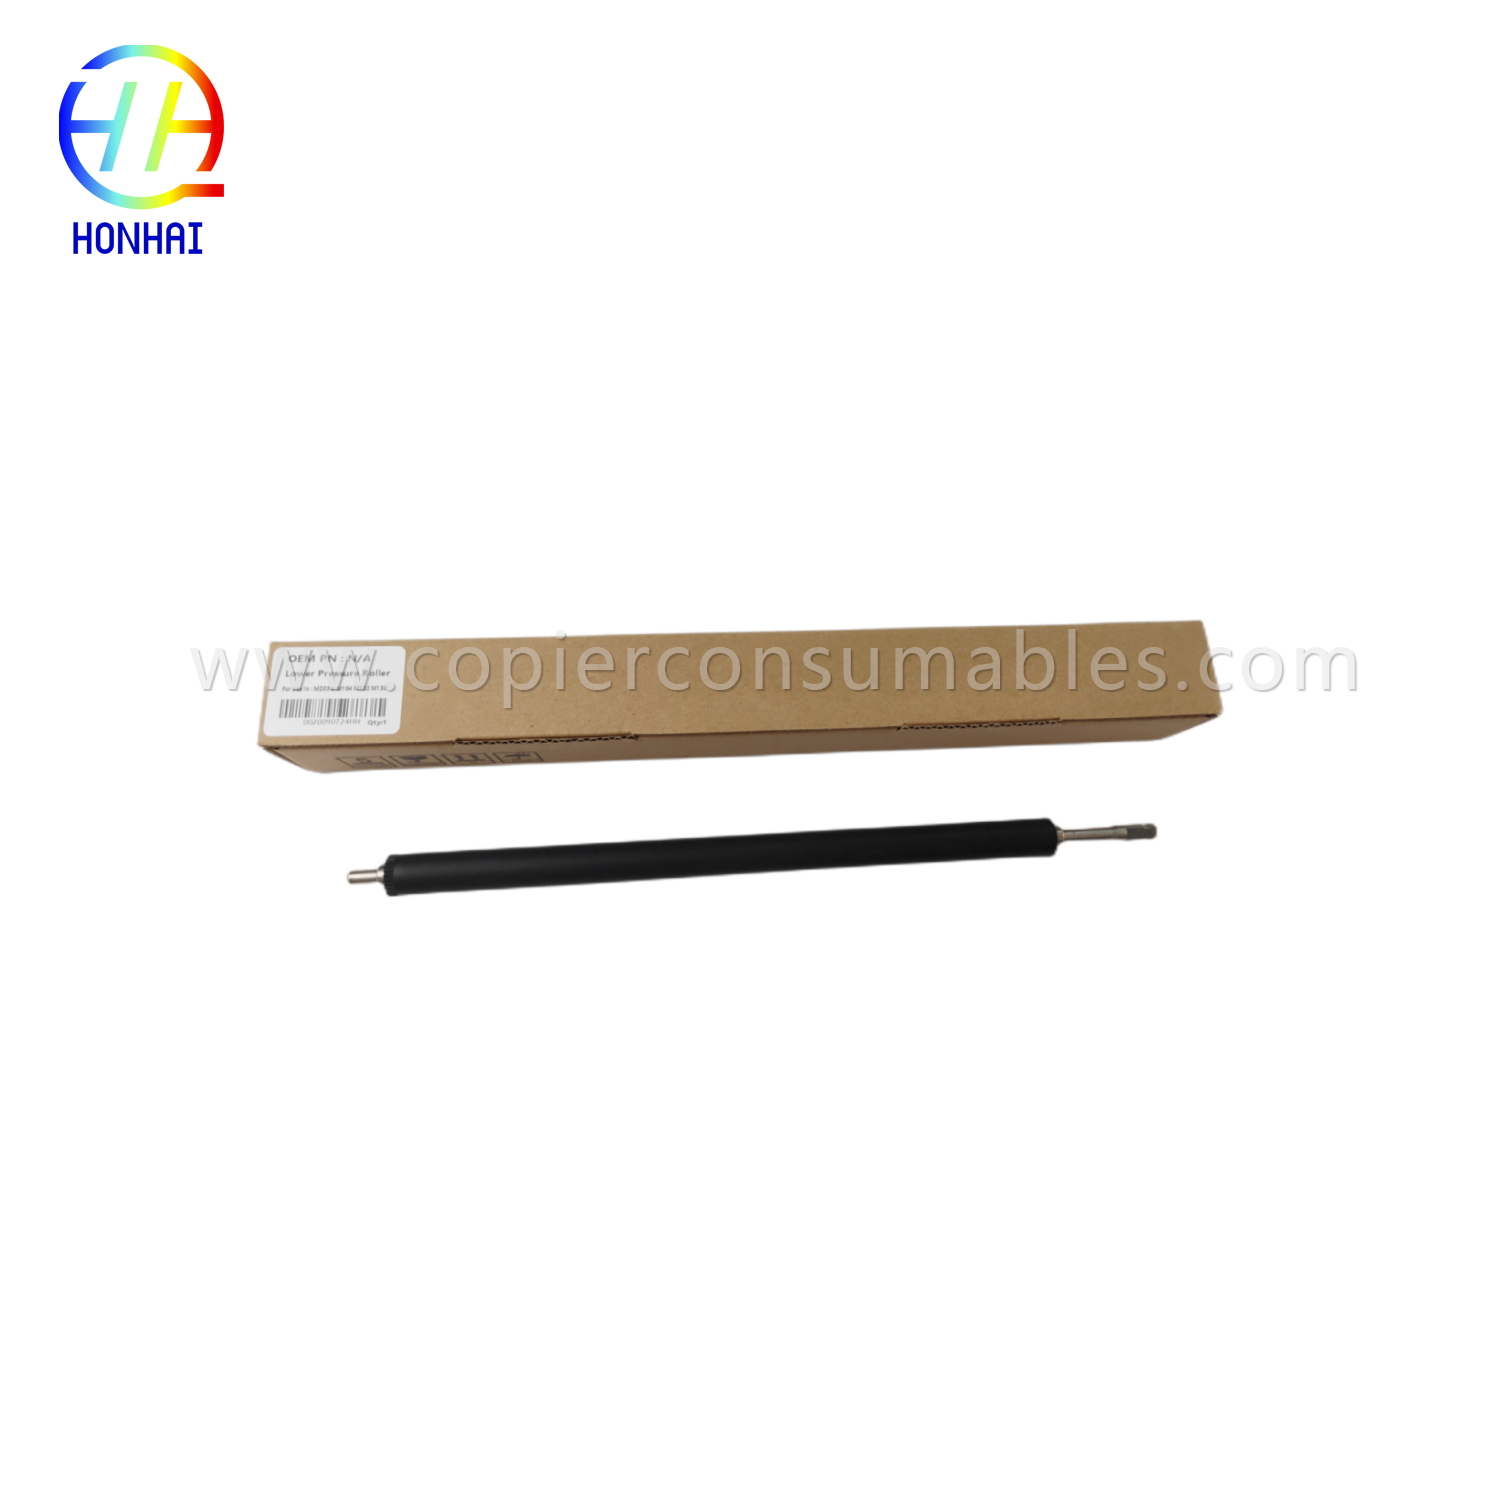 https://www.copierhonhaitech.com/lower-pression-roller-for-hp-m203-m227-m102-m134-lower-sleeves-roller-product/